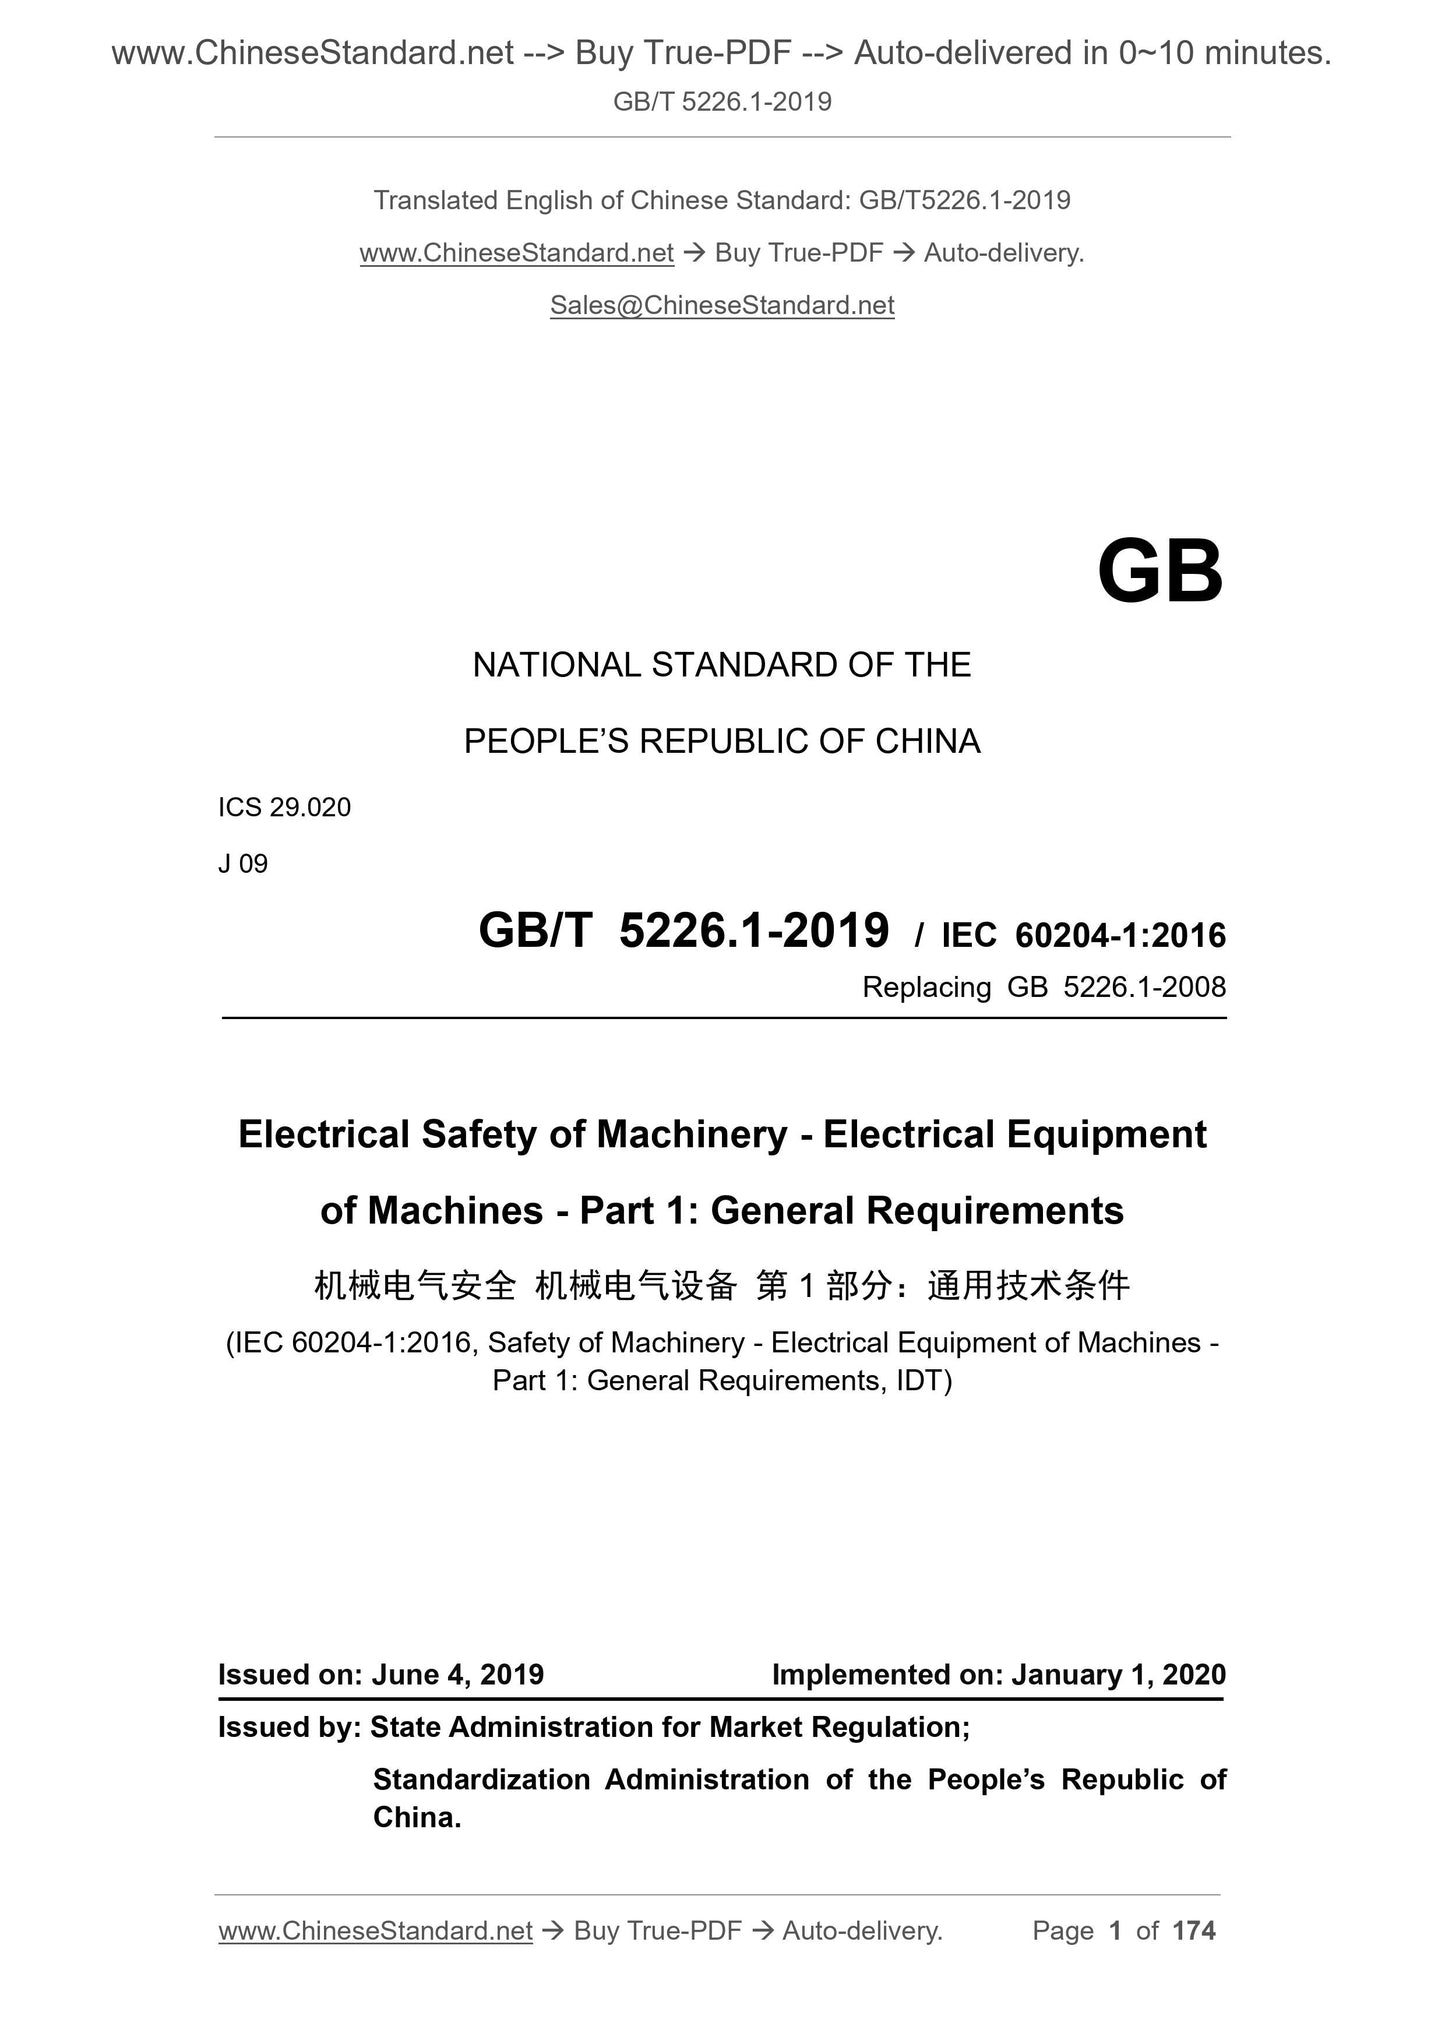 GB/T 5226.1-2019 Page 1